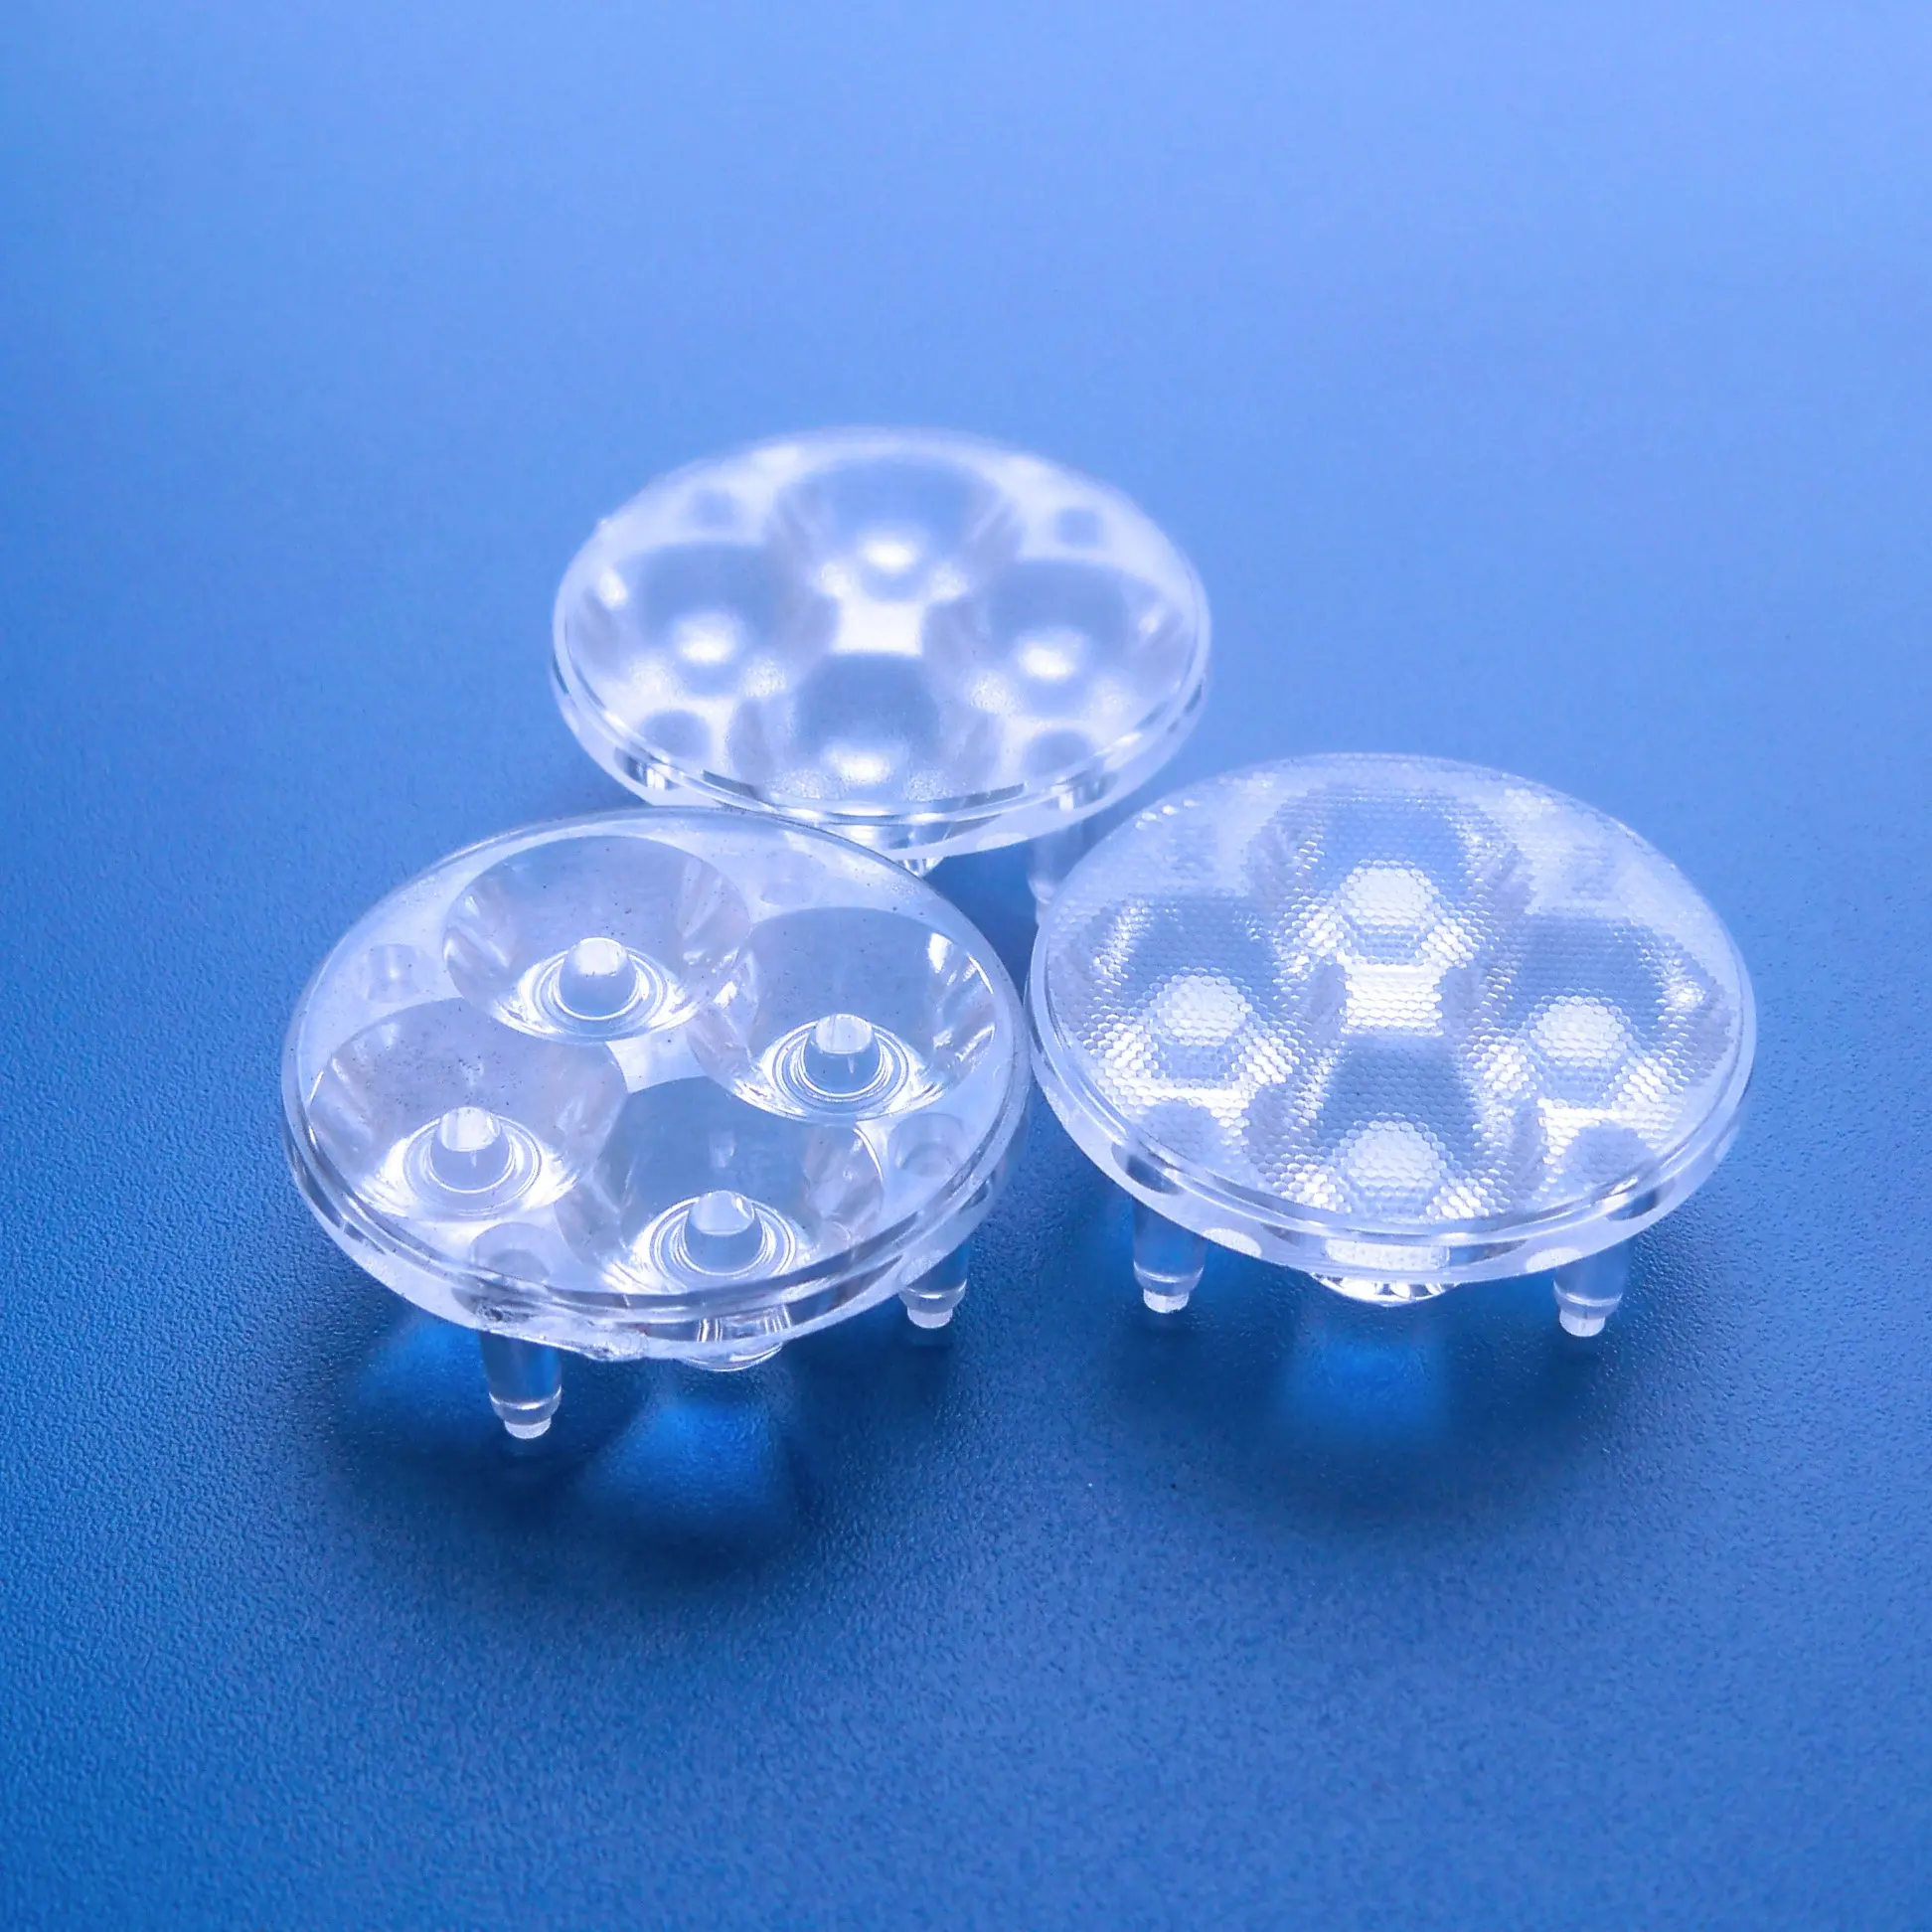 23mm 4IN1 High quality multi LED lens 10/15/30/38/45/60/75/90 degree for 2525 3030 3535 XPE OSLON LEDs HX-C23x4 Series lens